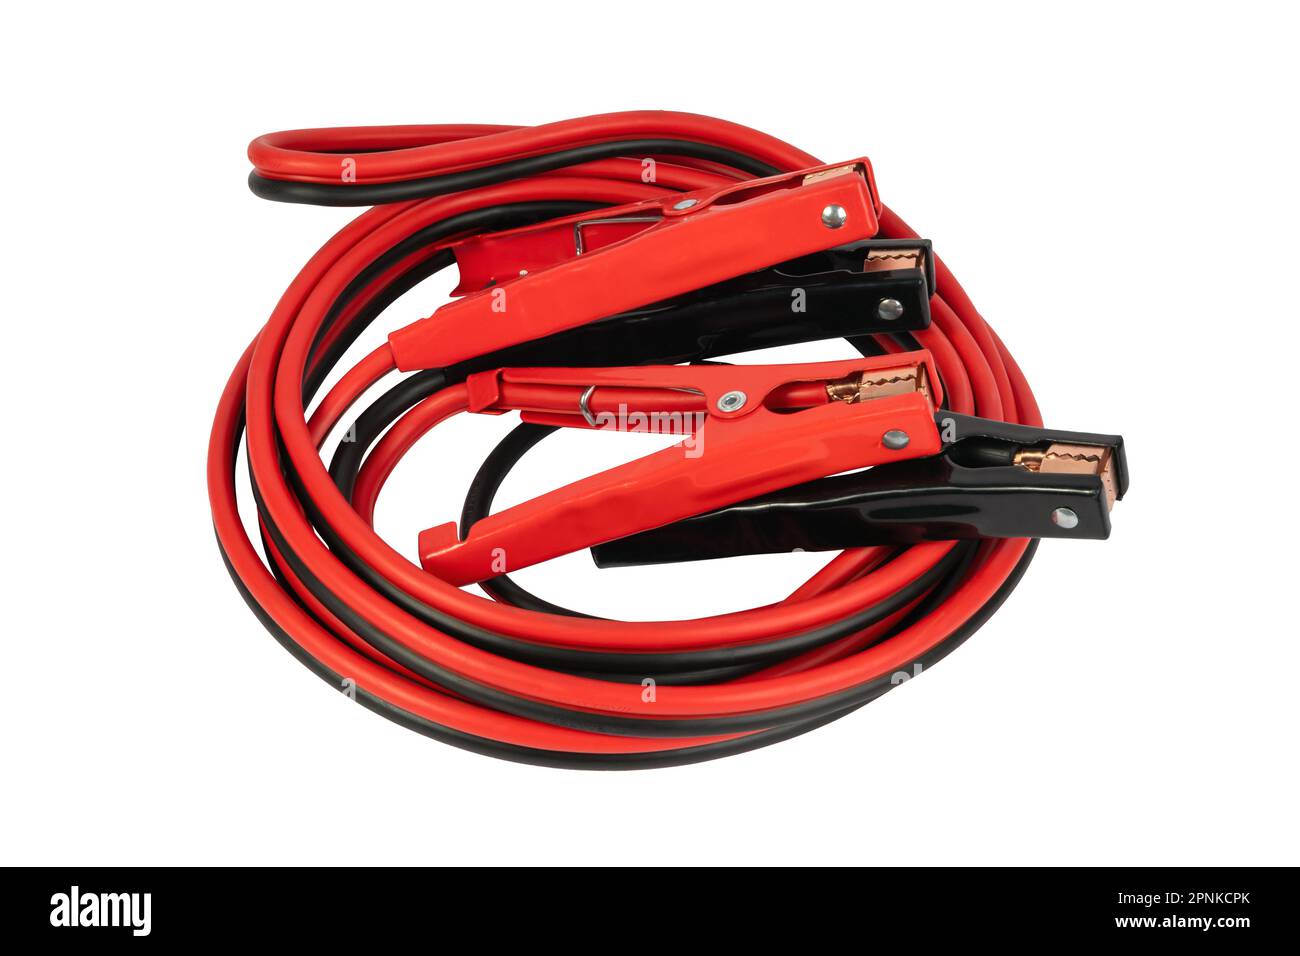 Electricity through jumper cables isolated on a white background. Red ...